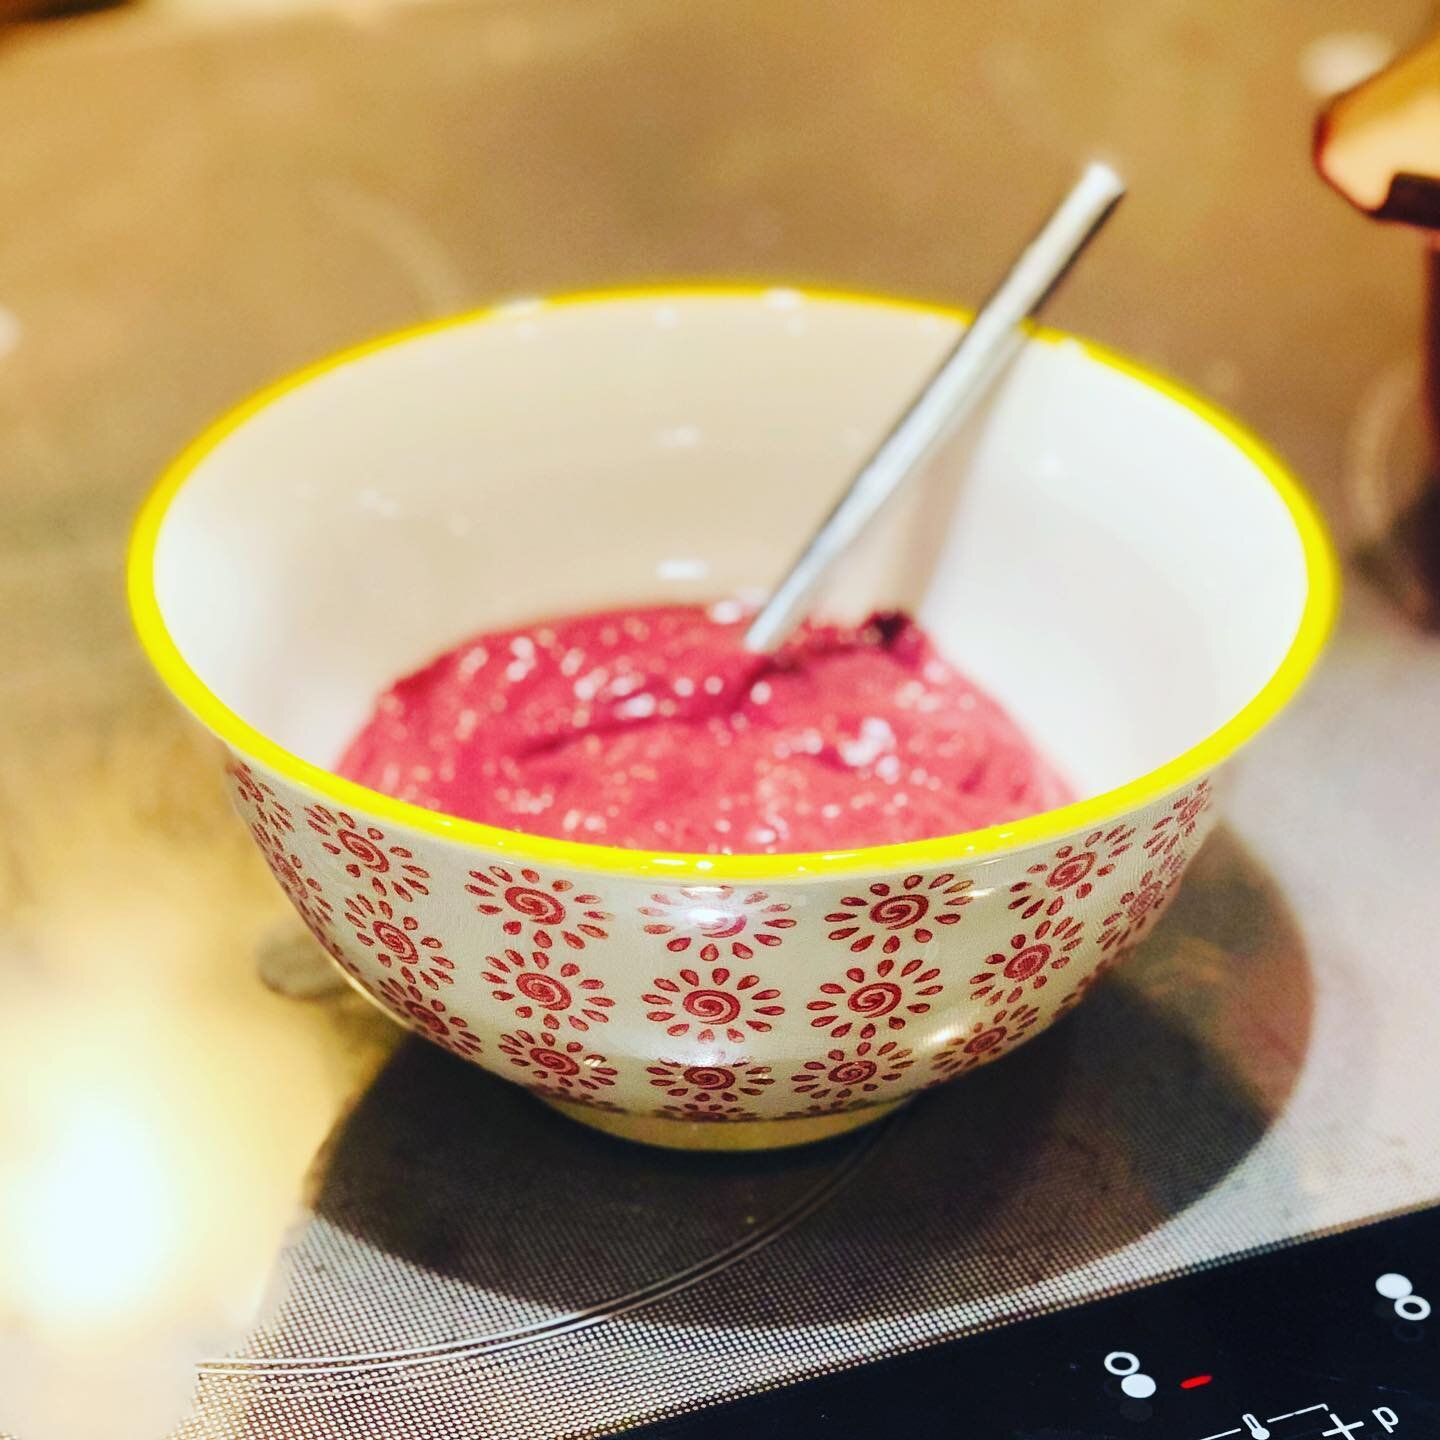 The boys got &lsquo;Mummy&rsquo;s strawberry ice cream&rsquo; after dinner - they just don&rsquo;t realise there&rsquo;s a few little extras in there 🤫 

* Frozen mixed berries 🍓 
* Frozen banana 🍌 
* Coconut milk 🥥 
* Açai berry powder 🫐 
* Vi